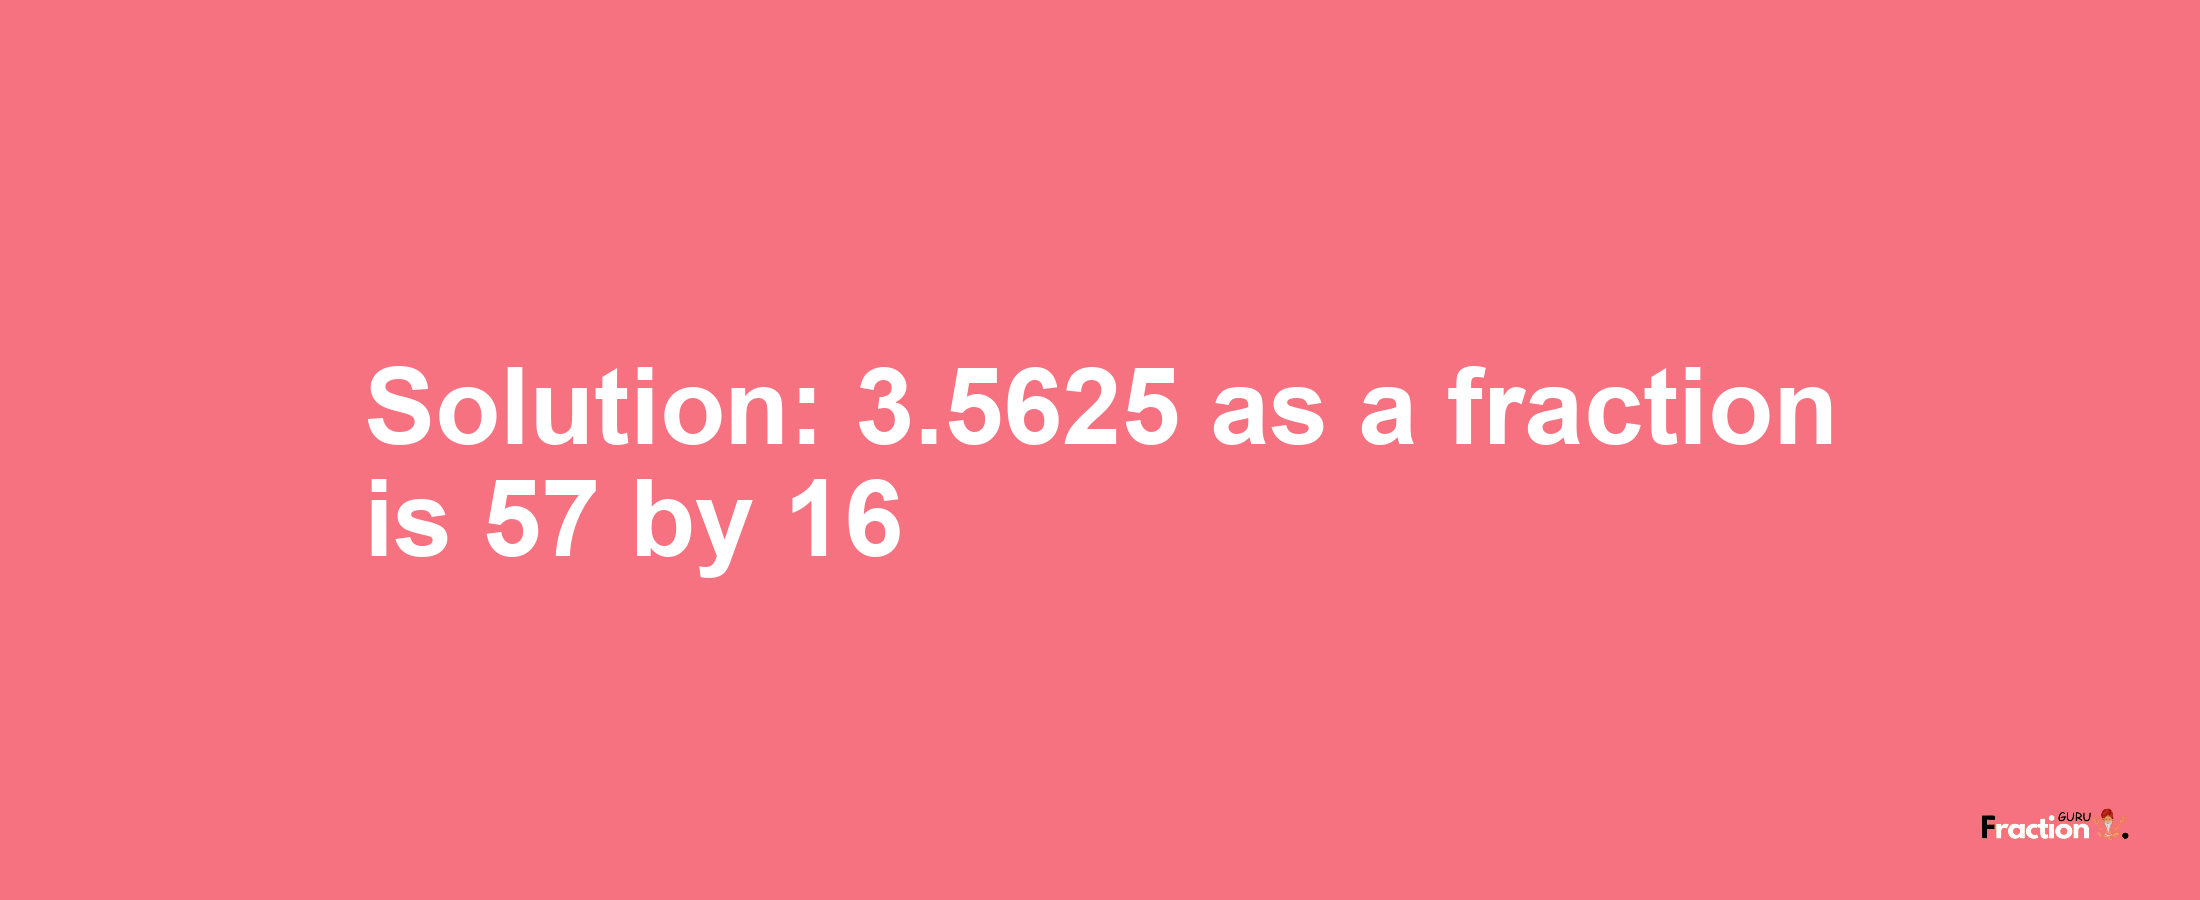 Solution:3.5625 as a fraction is 57/16